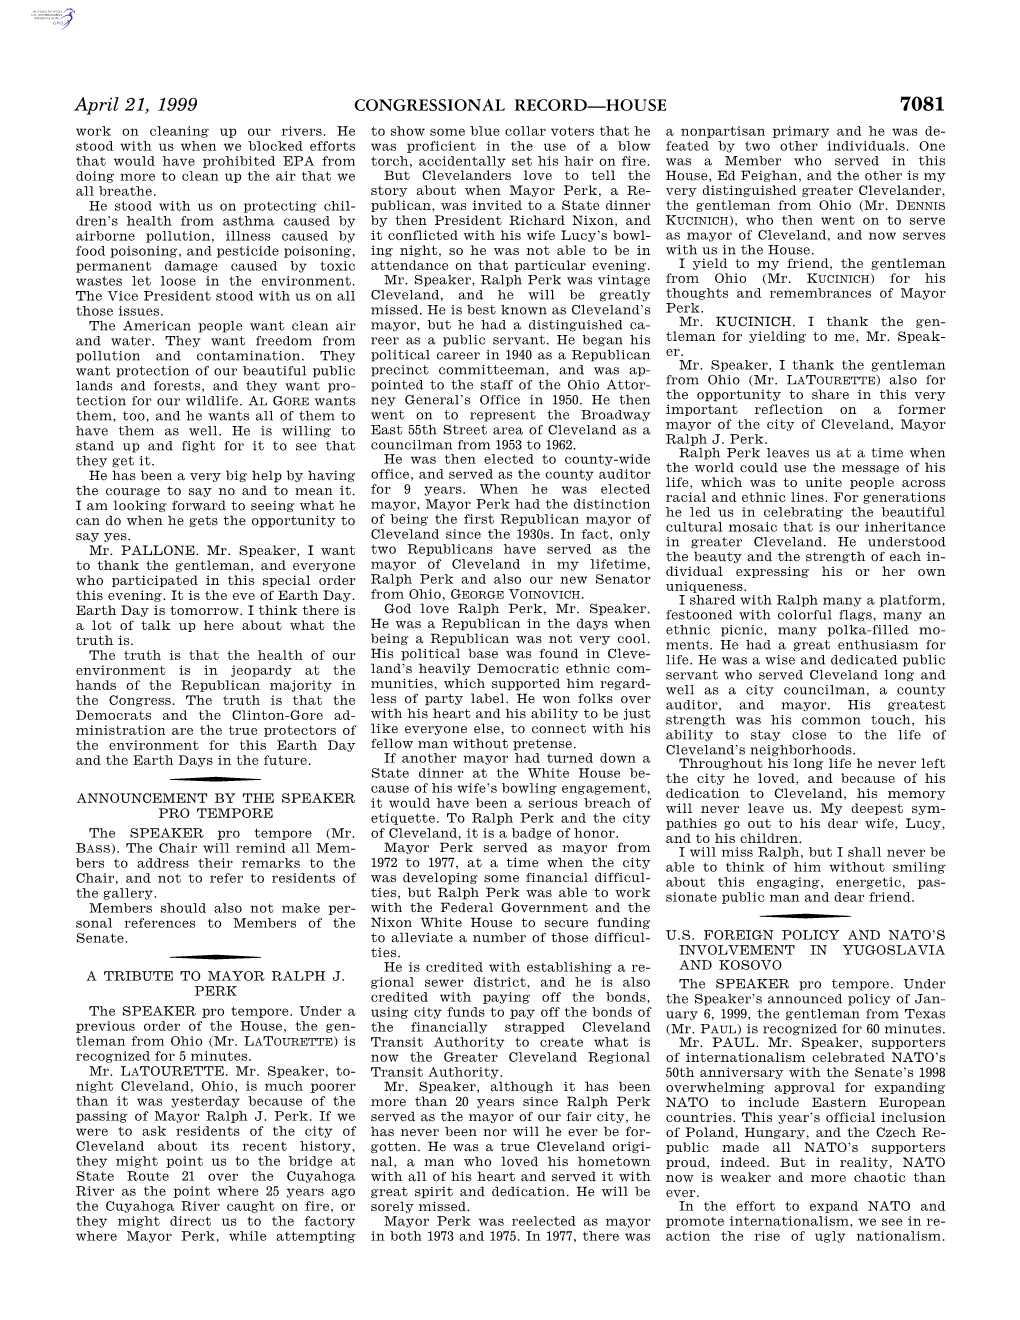 CONGRESSIONAL RECORD—HOUSE April 21, 1999